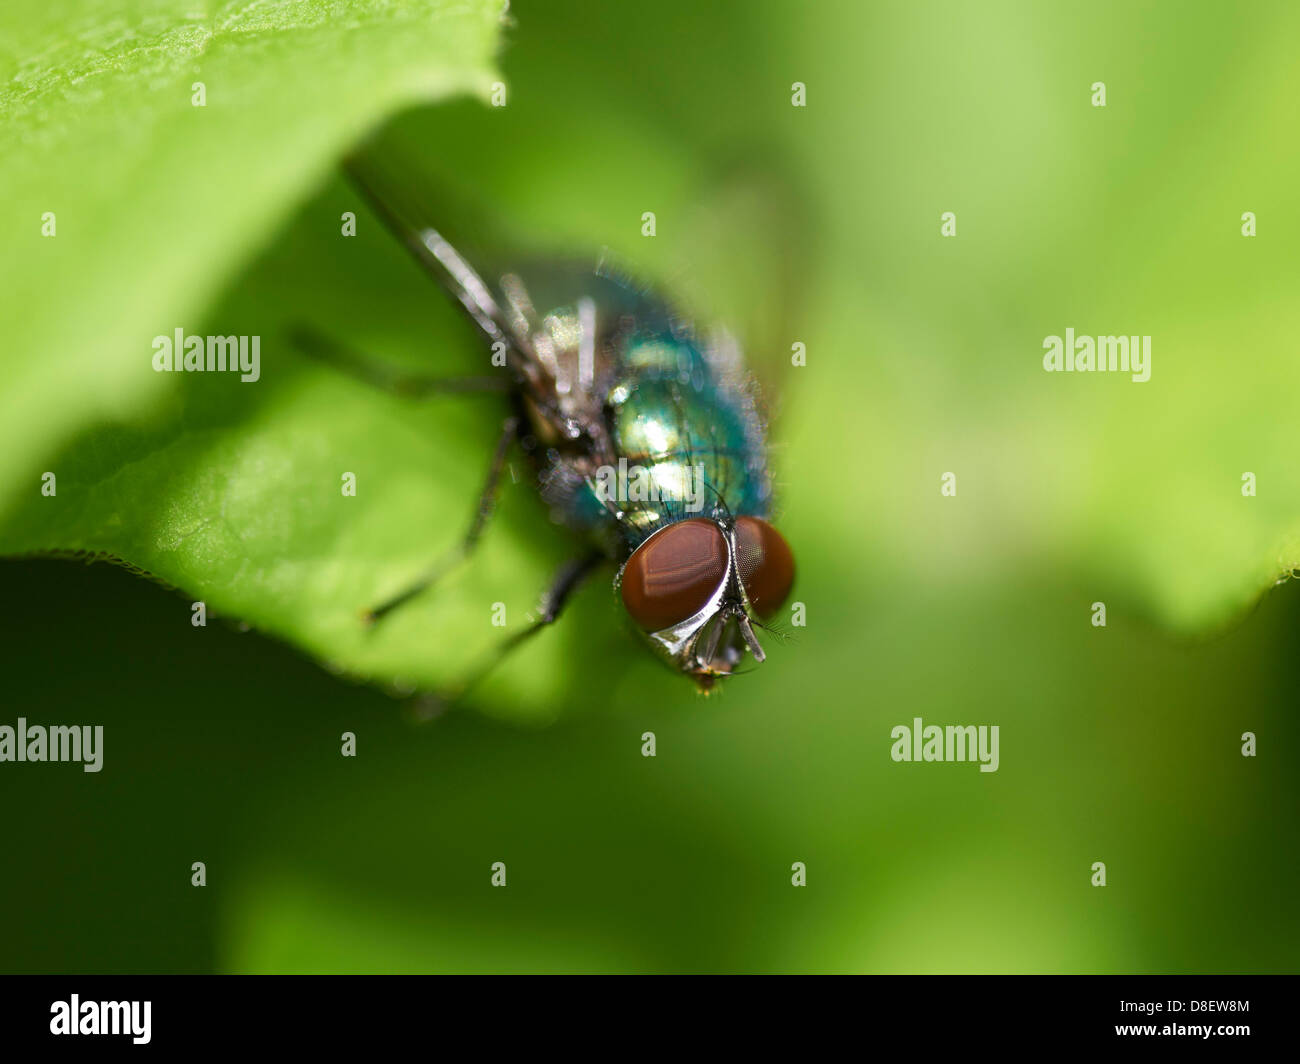 Green Bottle fly perched on plant leaf Stock Photo